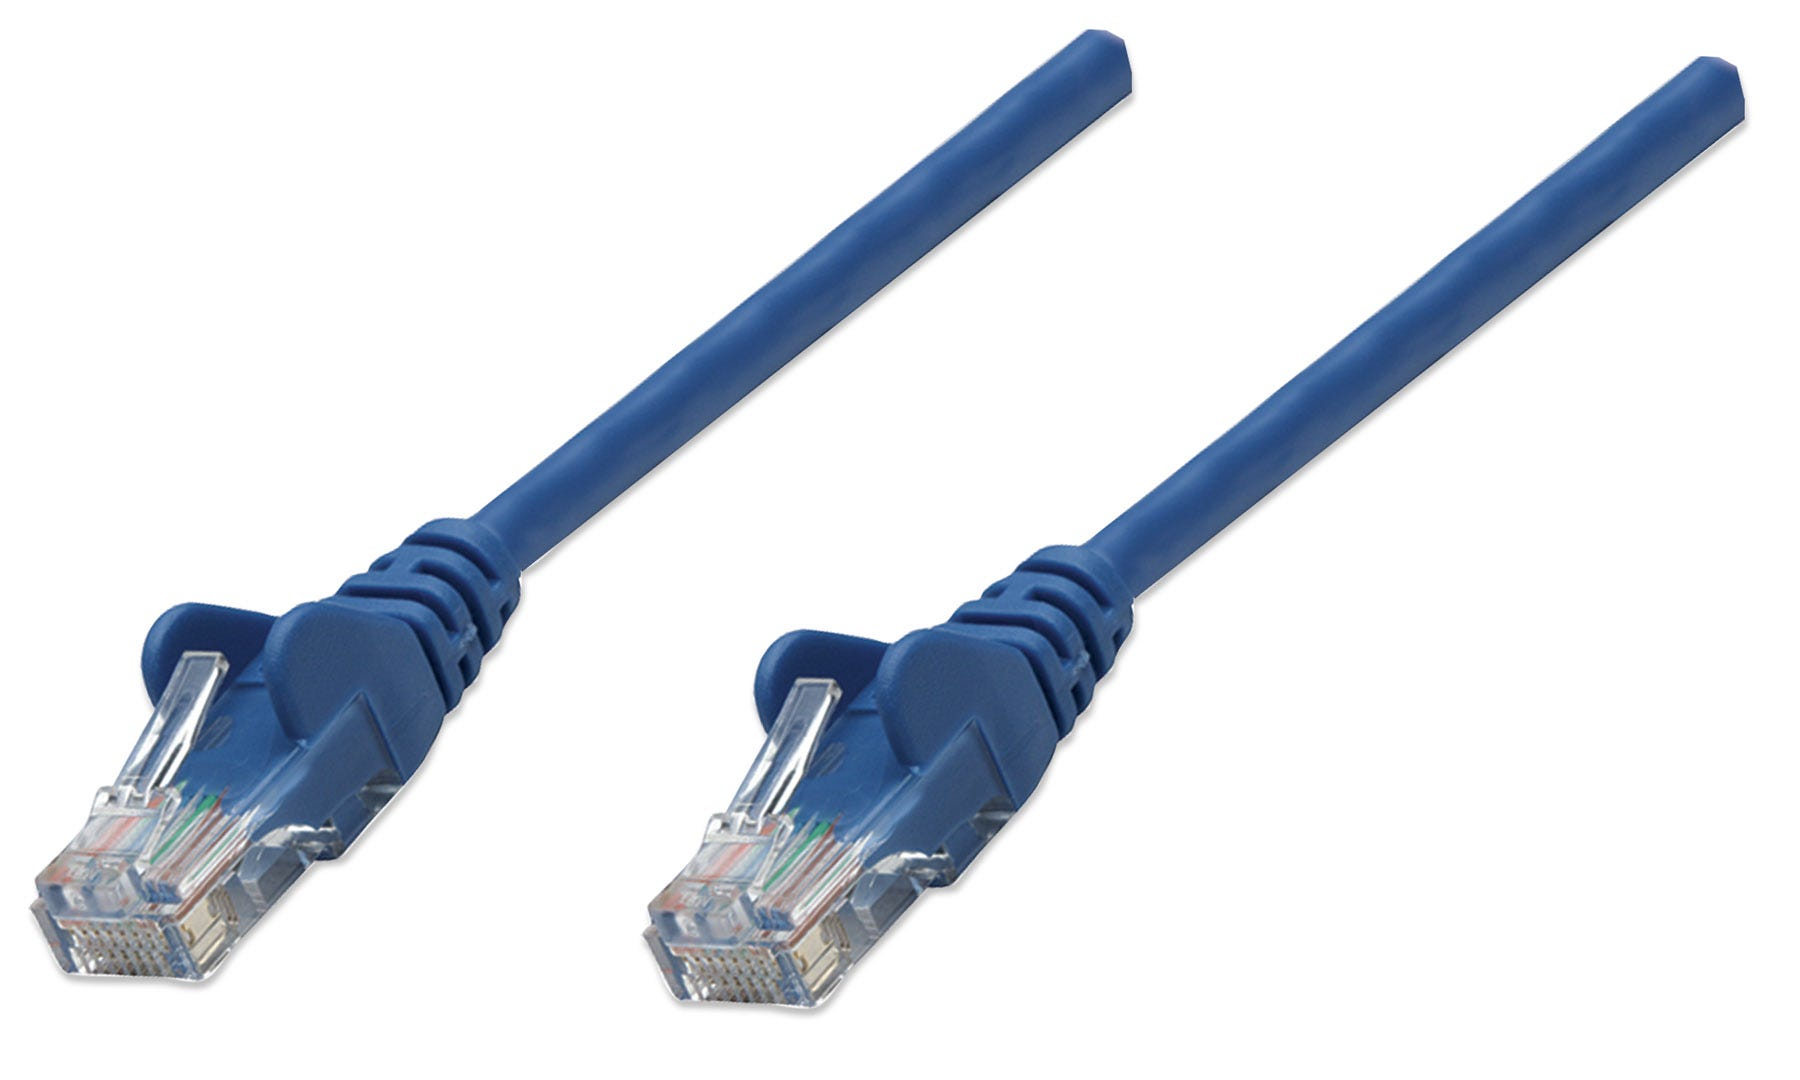 Cable Patch Intellinet 7.6 Mts (25.0F) Cat-5E Utp Azul (319874)